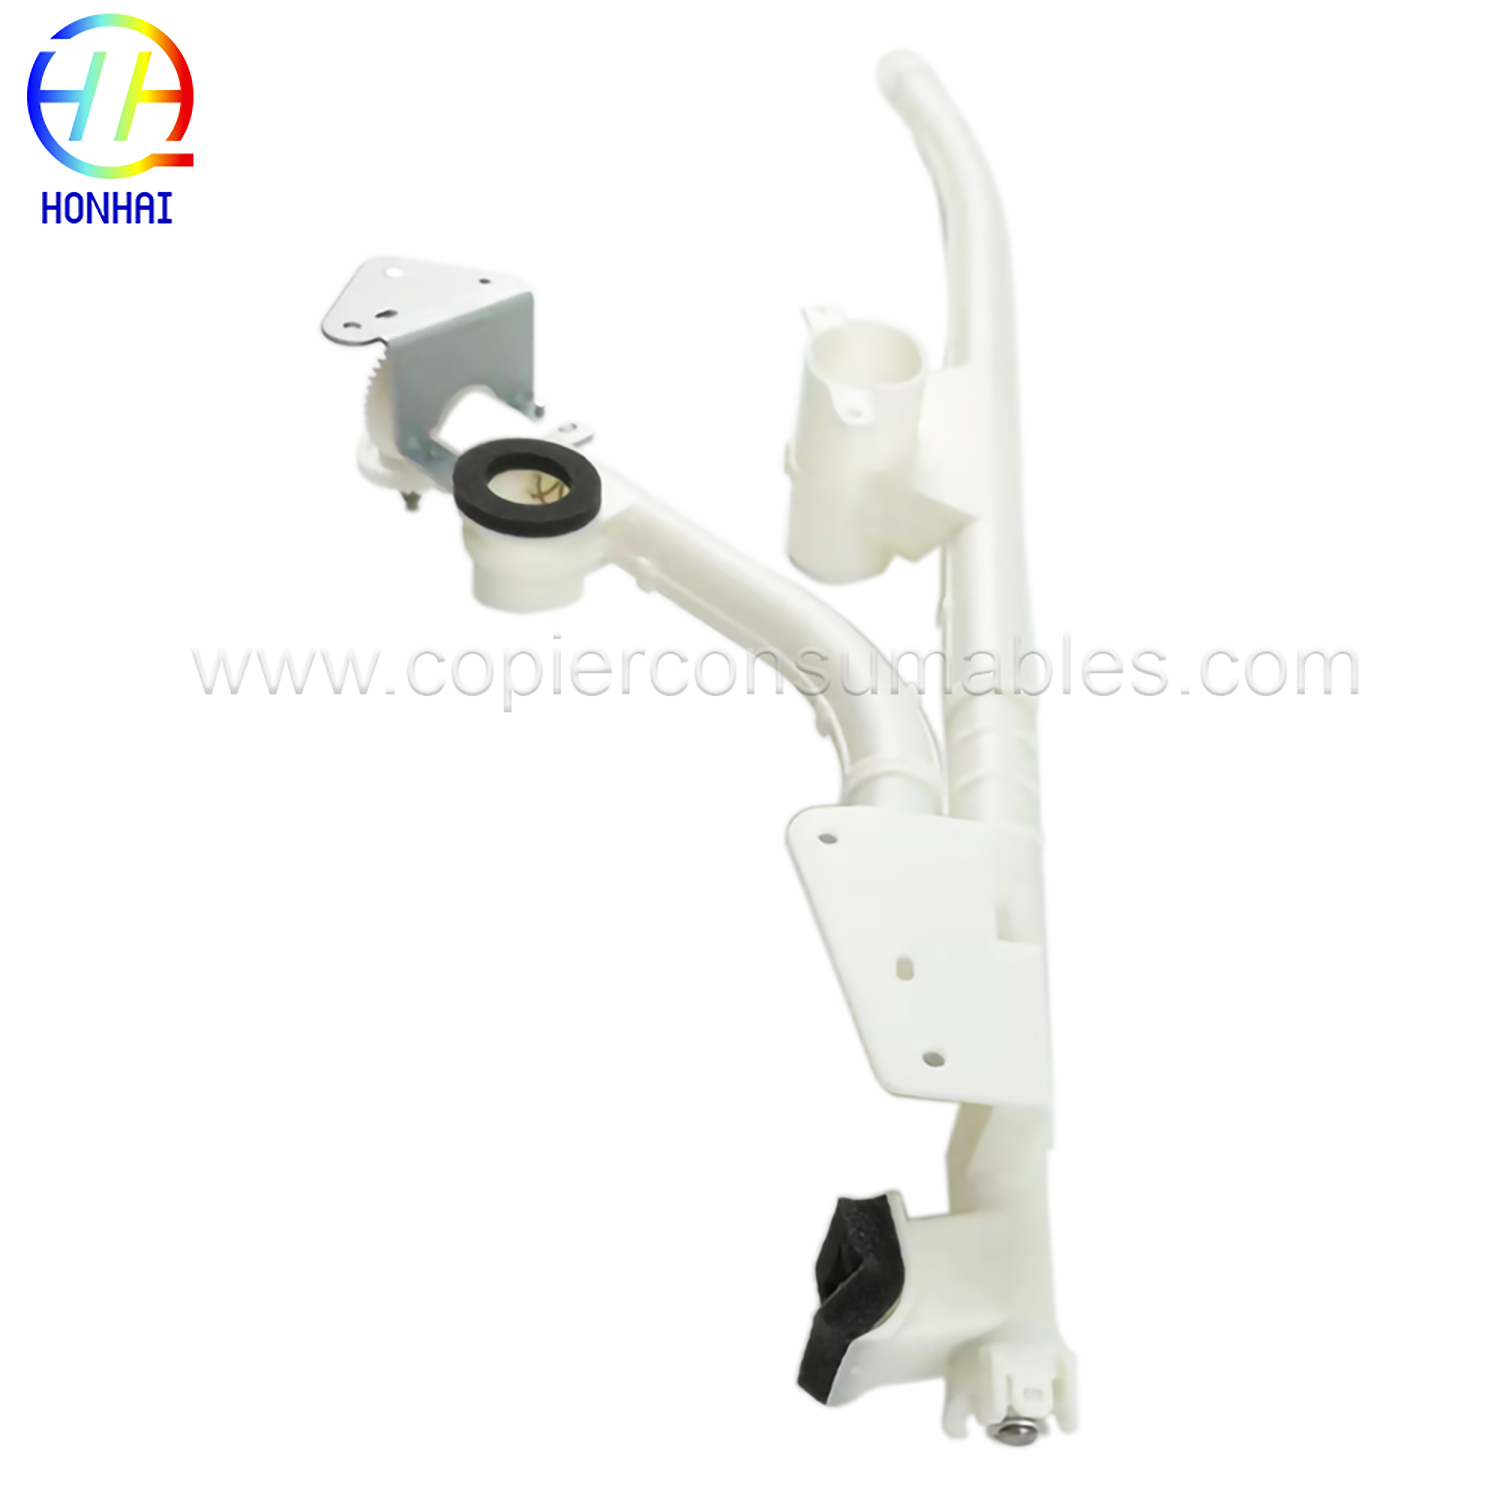 Quality Inspection for Printer Spare Parts List - Waste Toner Auger Assembly for Xerox 4110 4127 4112 4595 D95 D110 D125 119K90880 119K00280 – HONHAI